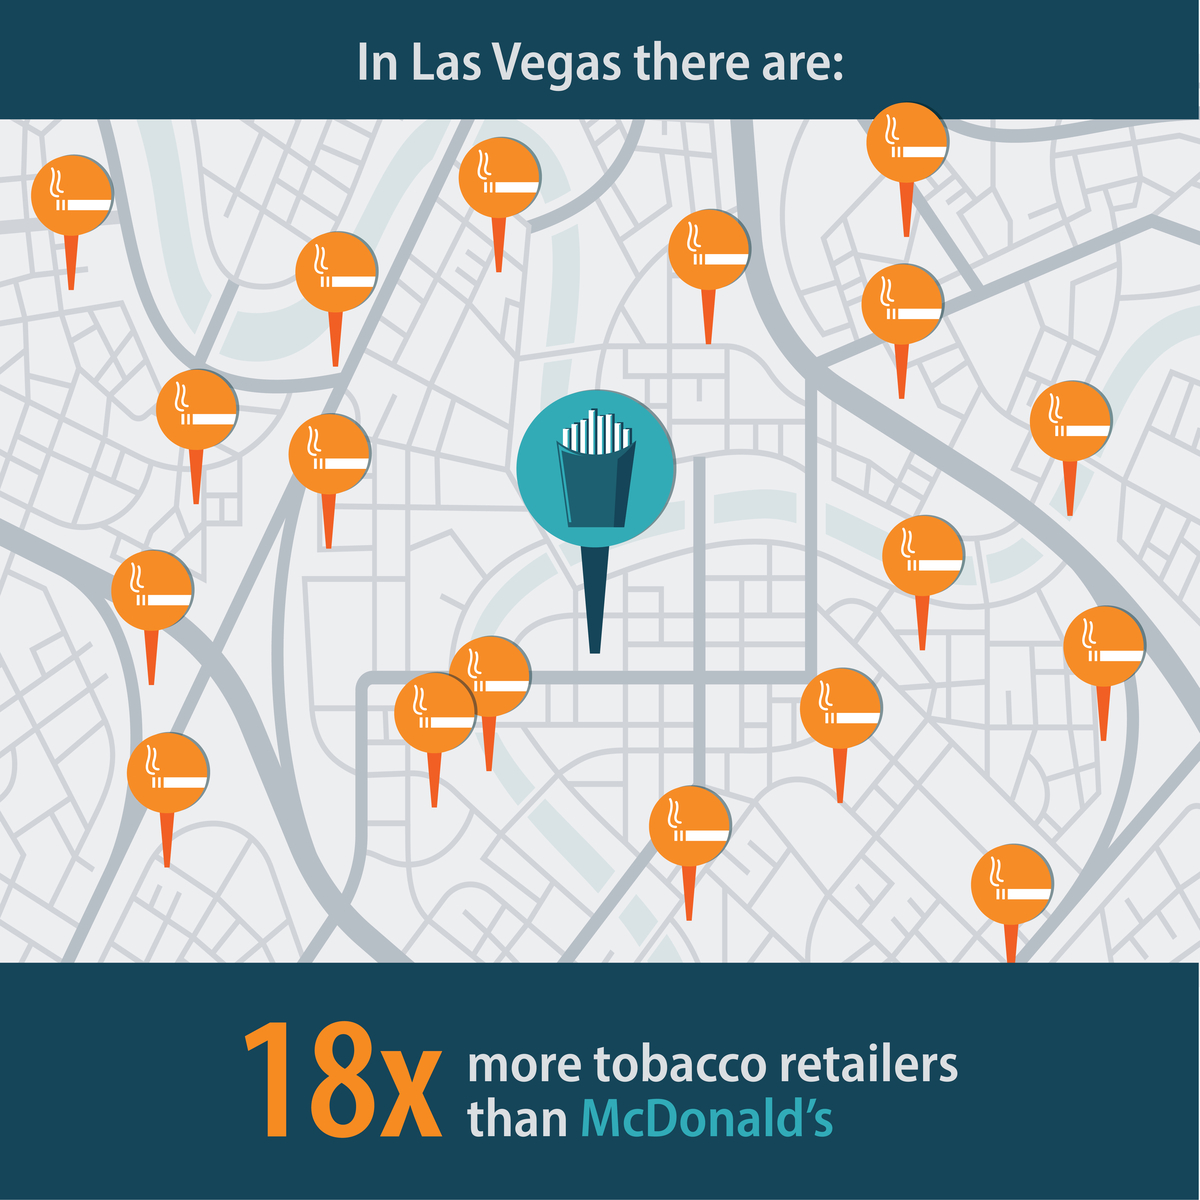 In Las Vegas there are: 18 times more tobacco retailers than McDonald's